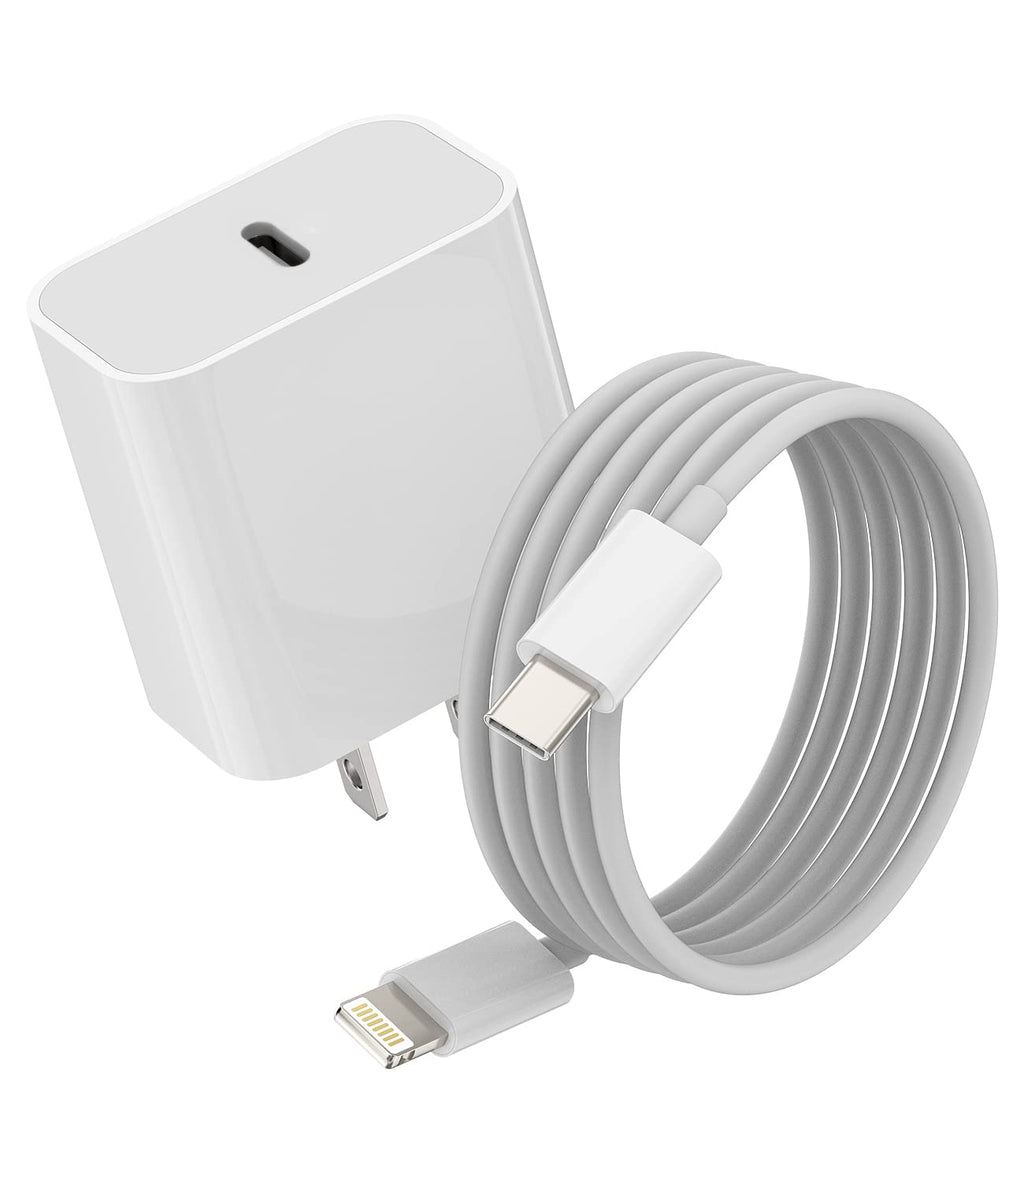  [AUSTRALIA] - 20W Watt Power Charging Adapter Lightning to USB C Fast PD Wall Charger Block With 5ft Cable Quick Box Compatible for IPhone 11 12 PRO MAX MINI XS XR SE2 X 8Plus Ipad ARI Airpod Cord Samsung Type Plug